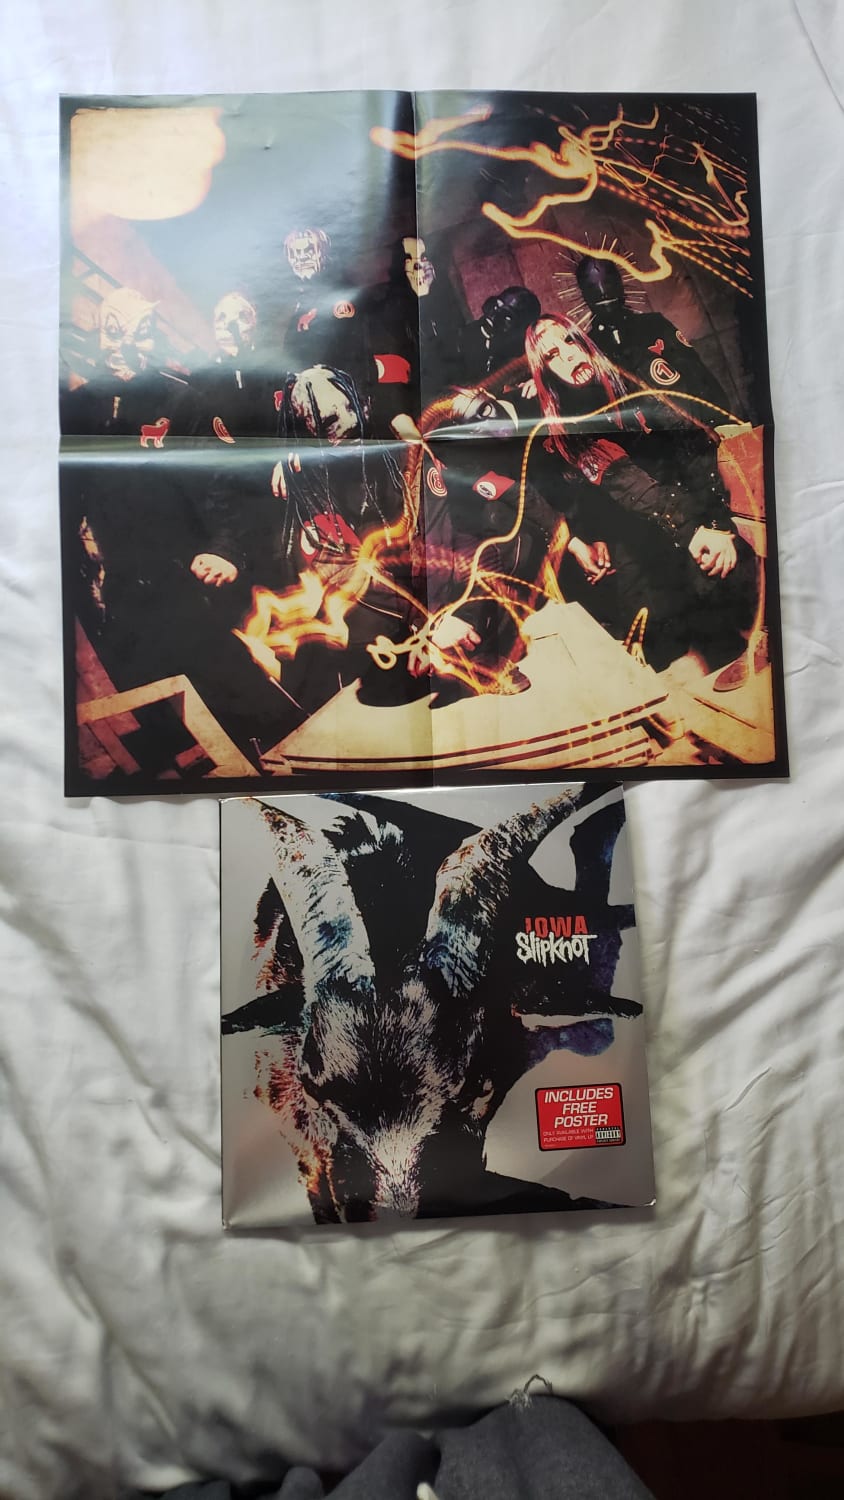 My holy grail arrived today! Iowa by Slipknot 2001 pressing with poster!